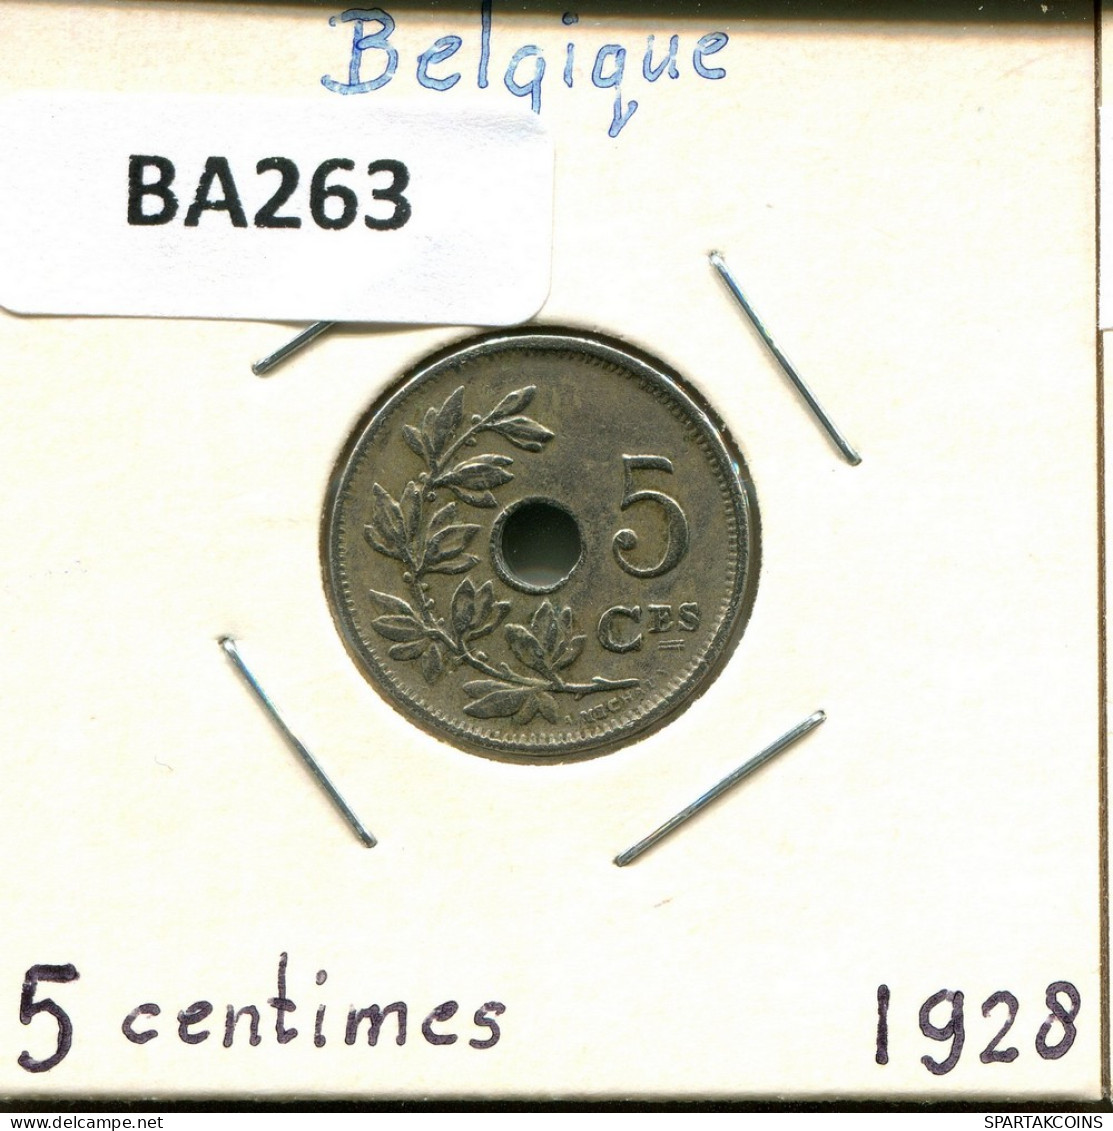 5 CENTIMES 1928 FRENCH Text BELGIUM Coin #BA263.U - 5 Centimes